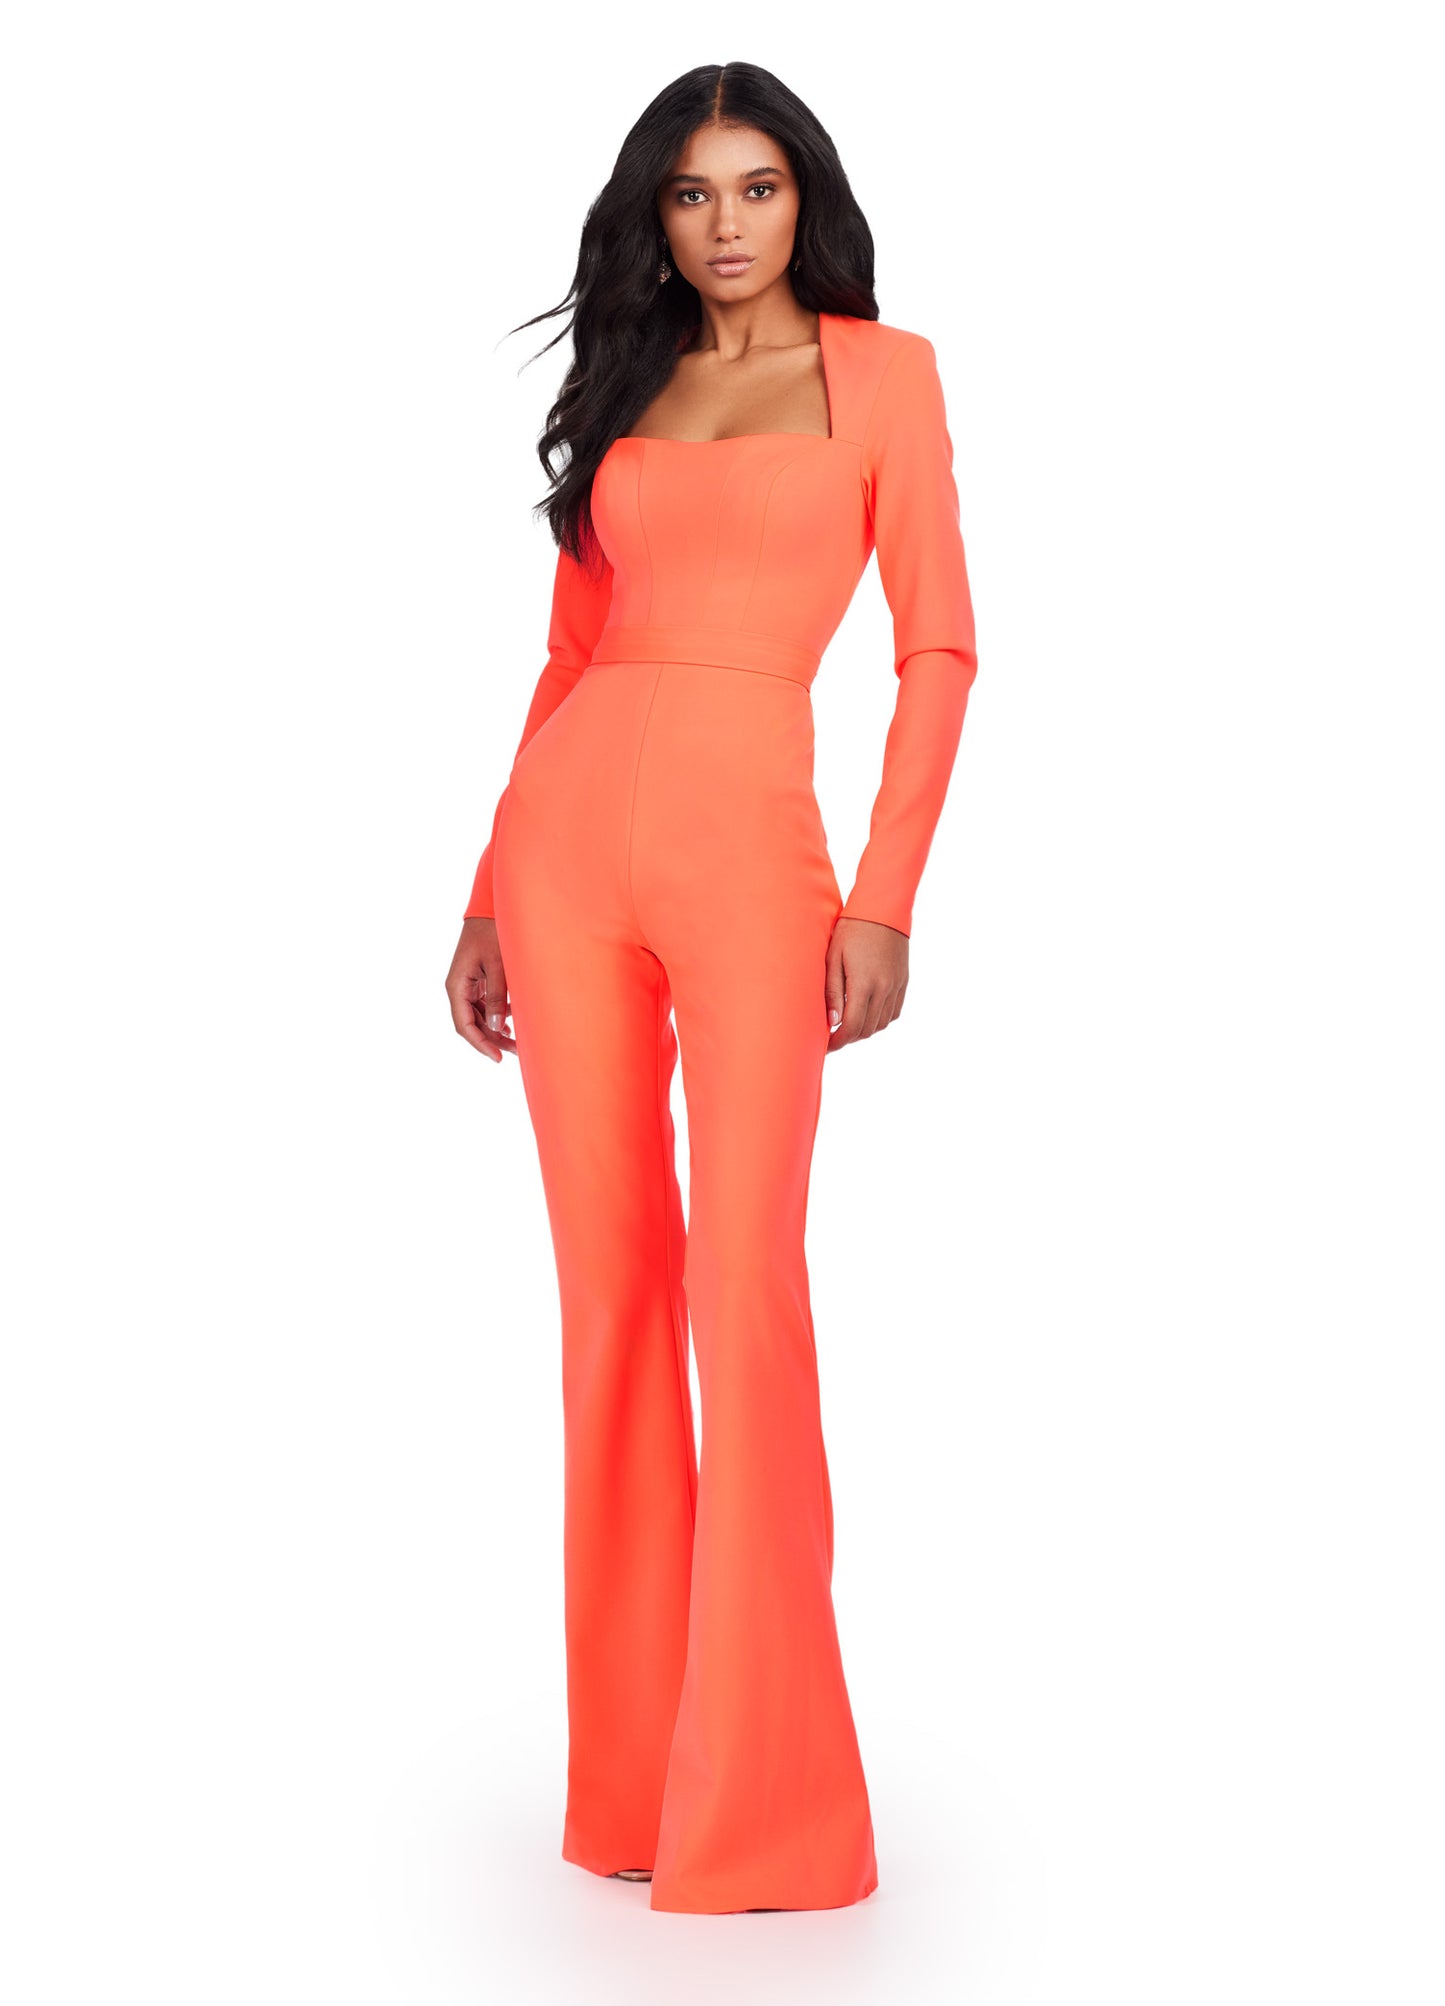 Upgrade your formal attire with the Ashley Lauren 11530 Long Sleeve Scuba Jumpsuit. The square neck and long sleeves add a touch of sophistication, while the scuba fabric provides a flattering fit. Perfect for prom or any special occasion, this jumpsuit is sure to make a statement. Fall in love with this long sleeve scuba jumpsuit with square neckline.